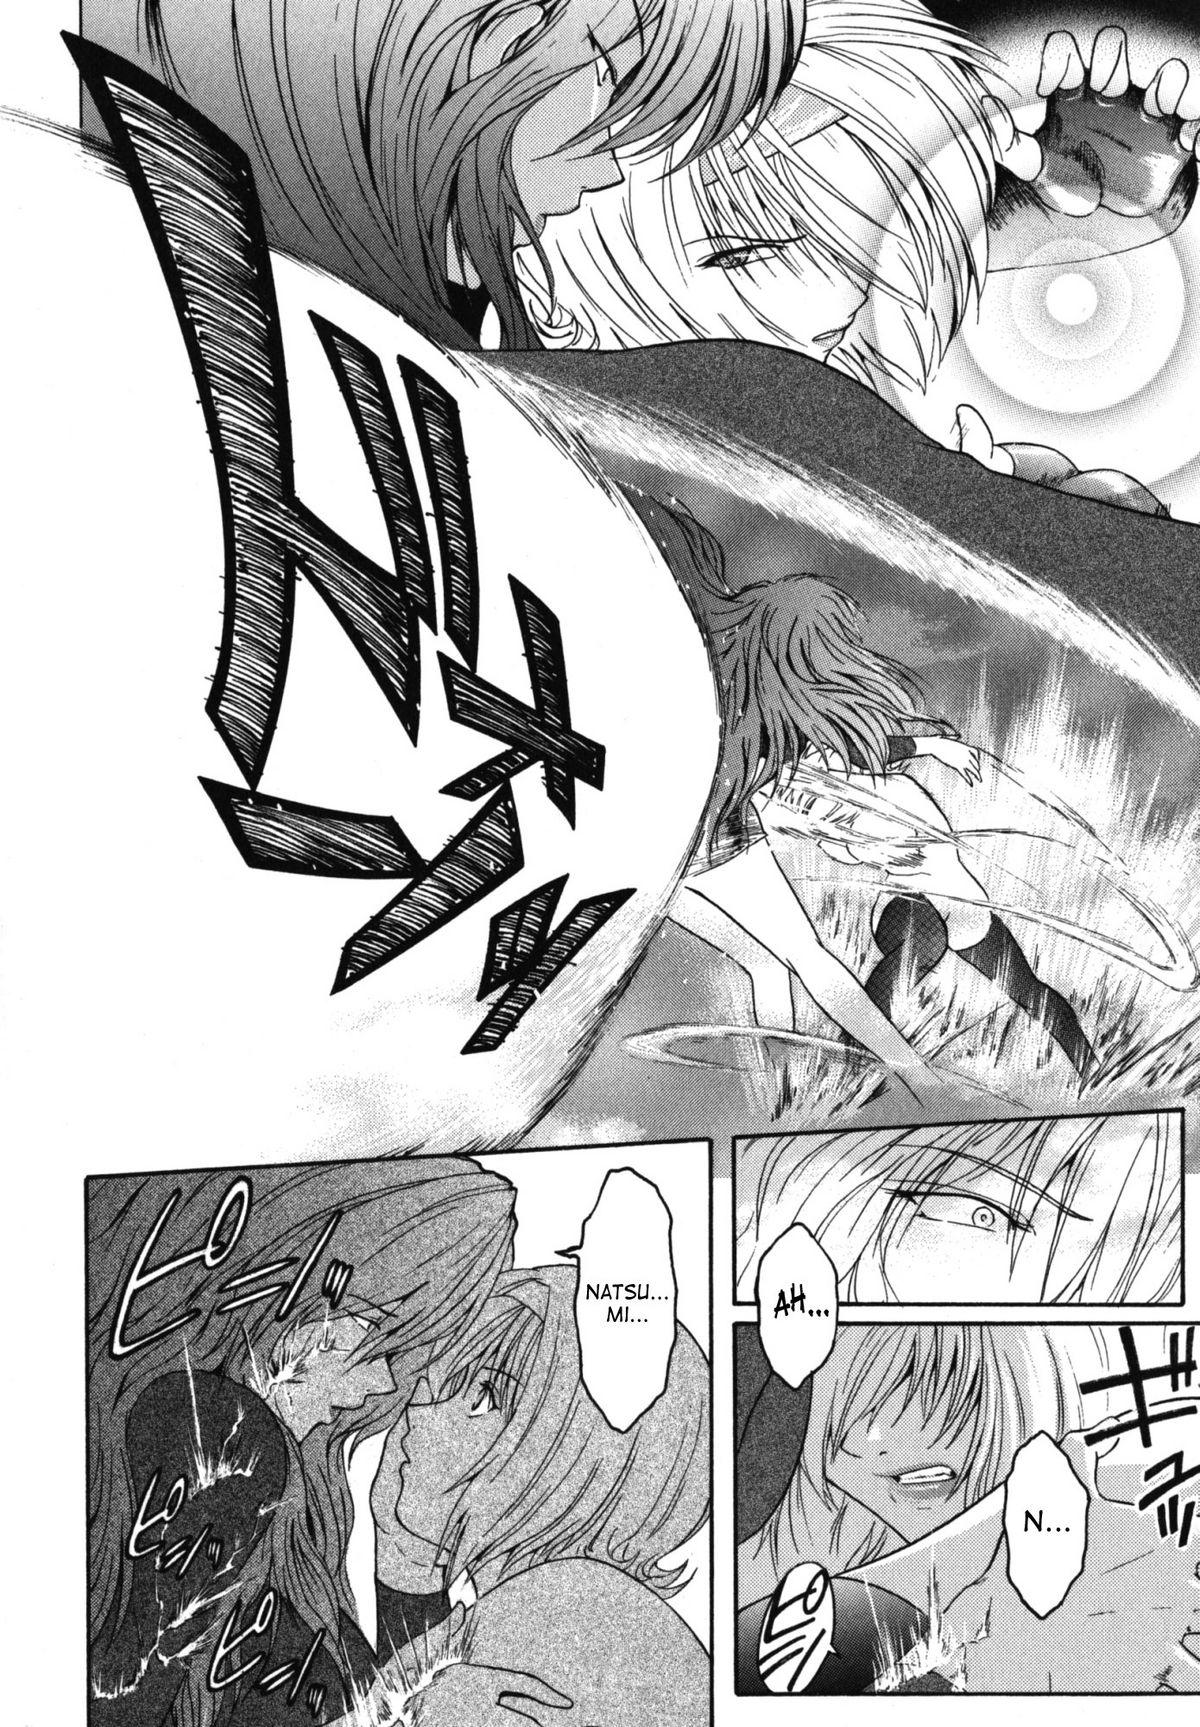 Kabe no Naka no Tenshi Jou | The Angel Within The Barrier Vol. 1 64